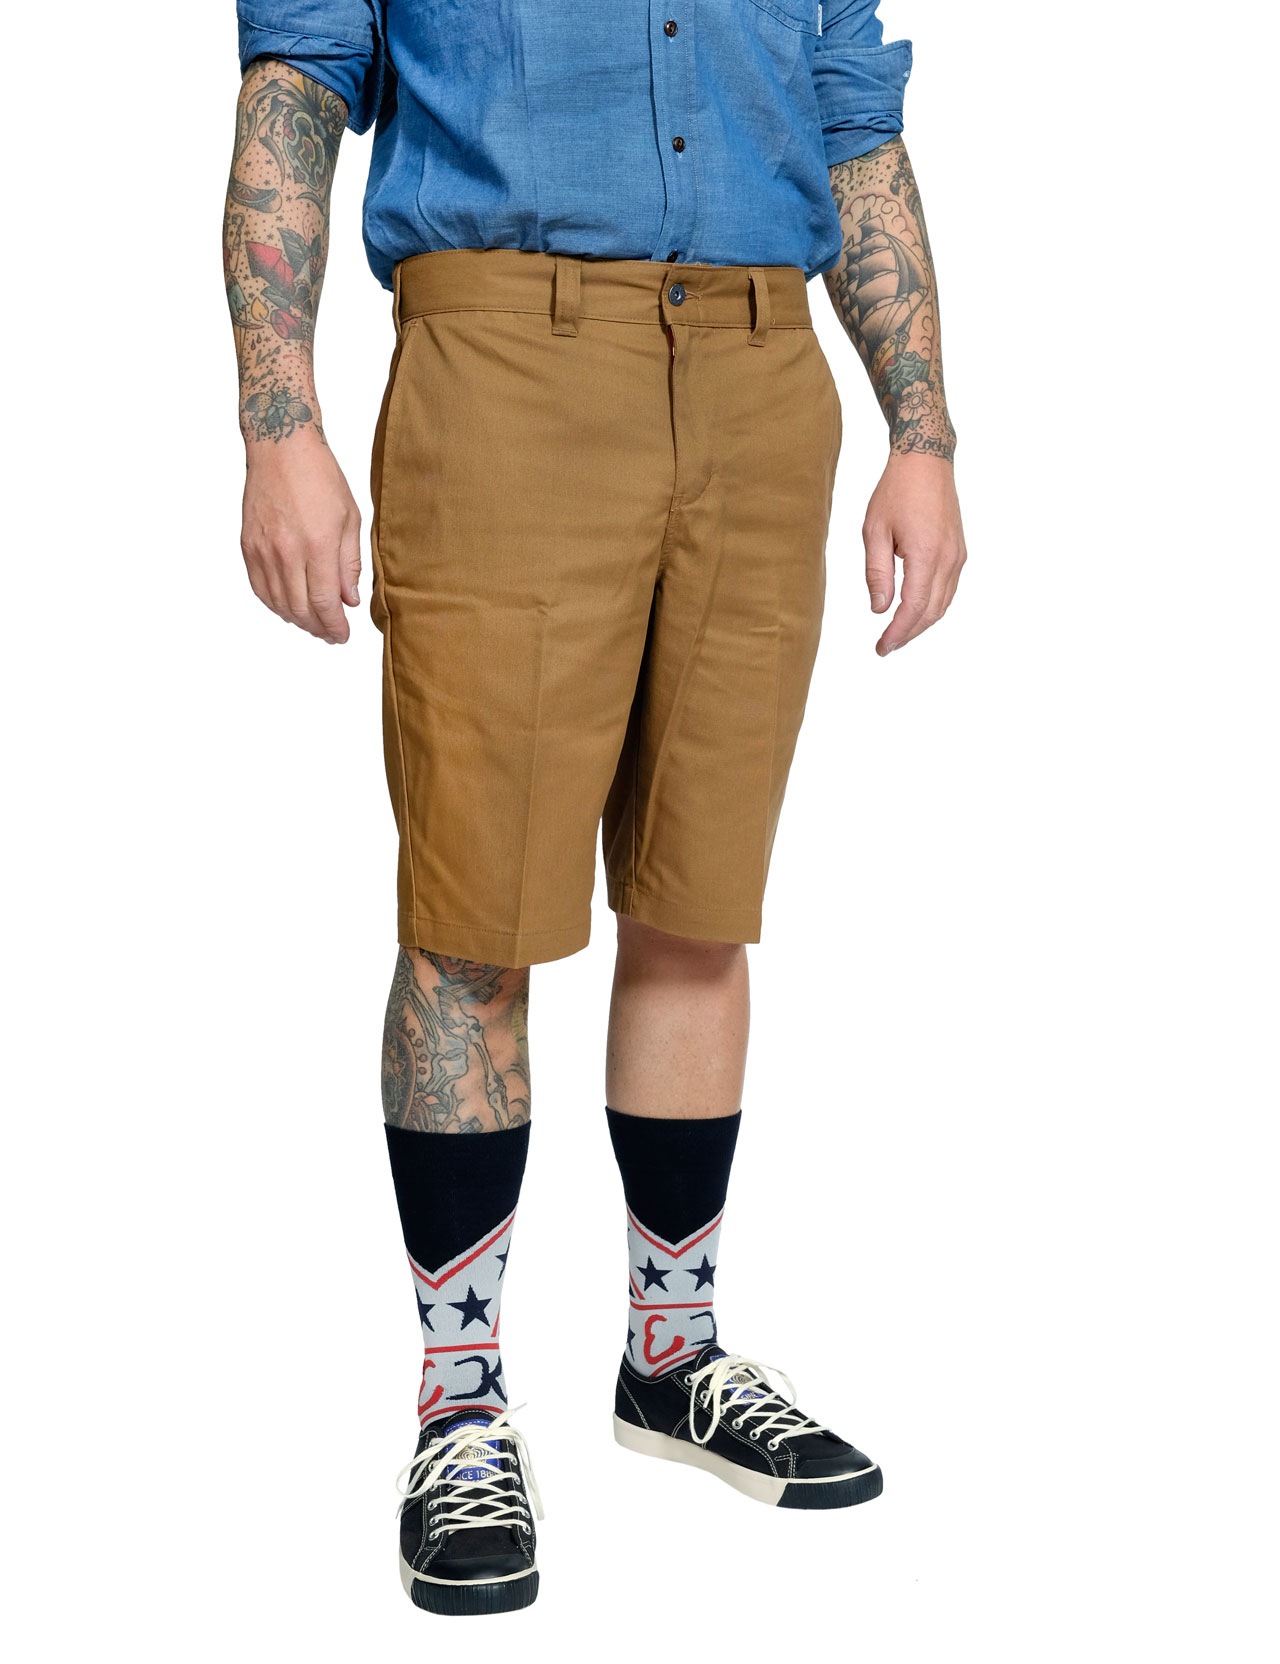 Dickies - 67 Collection Industrial Work Shorts - Brown Duck